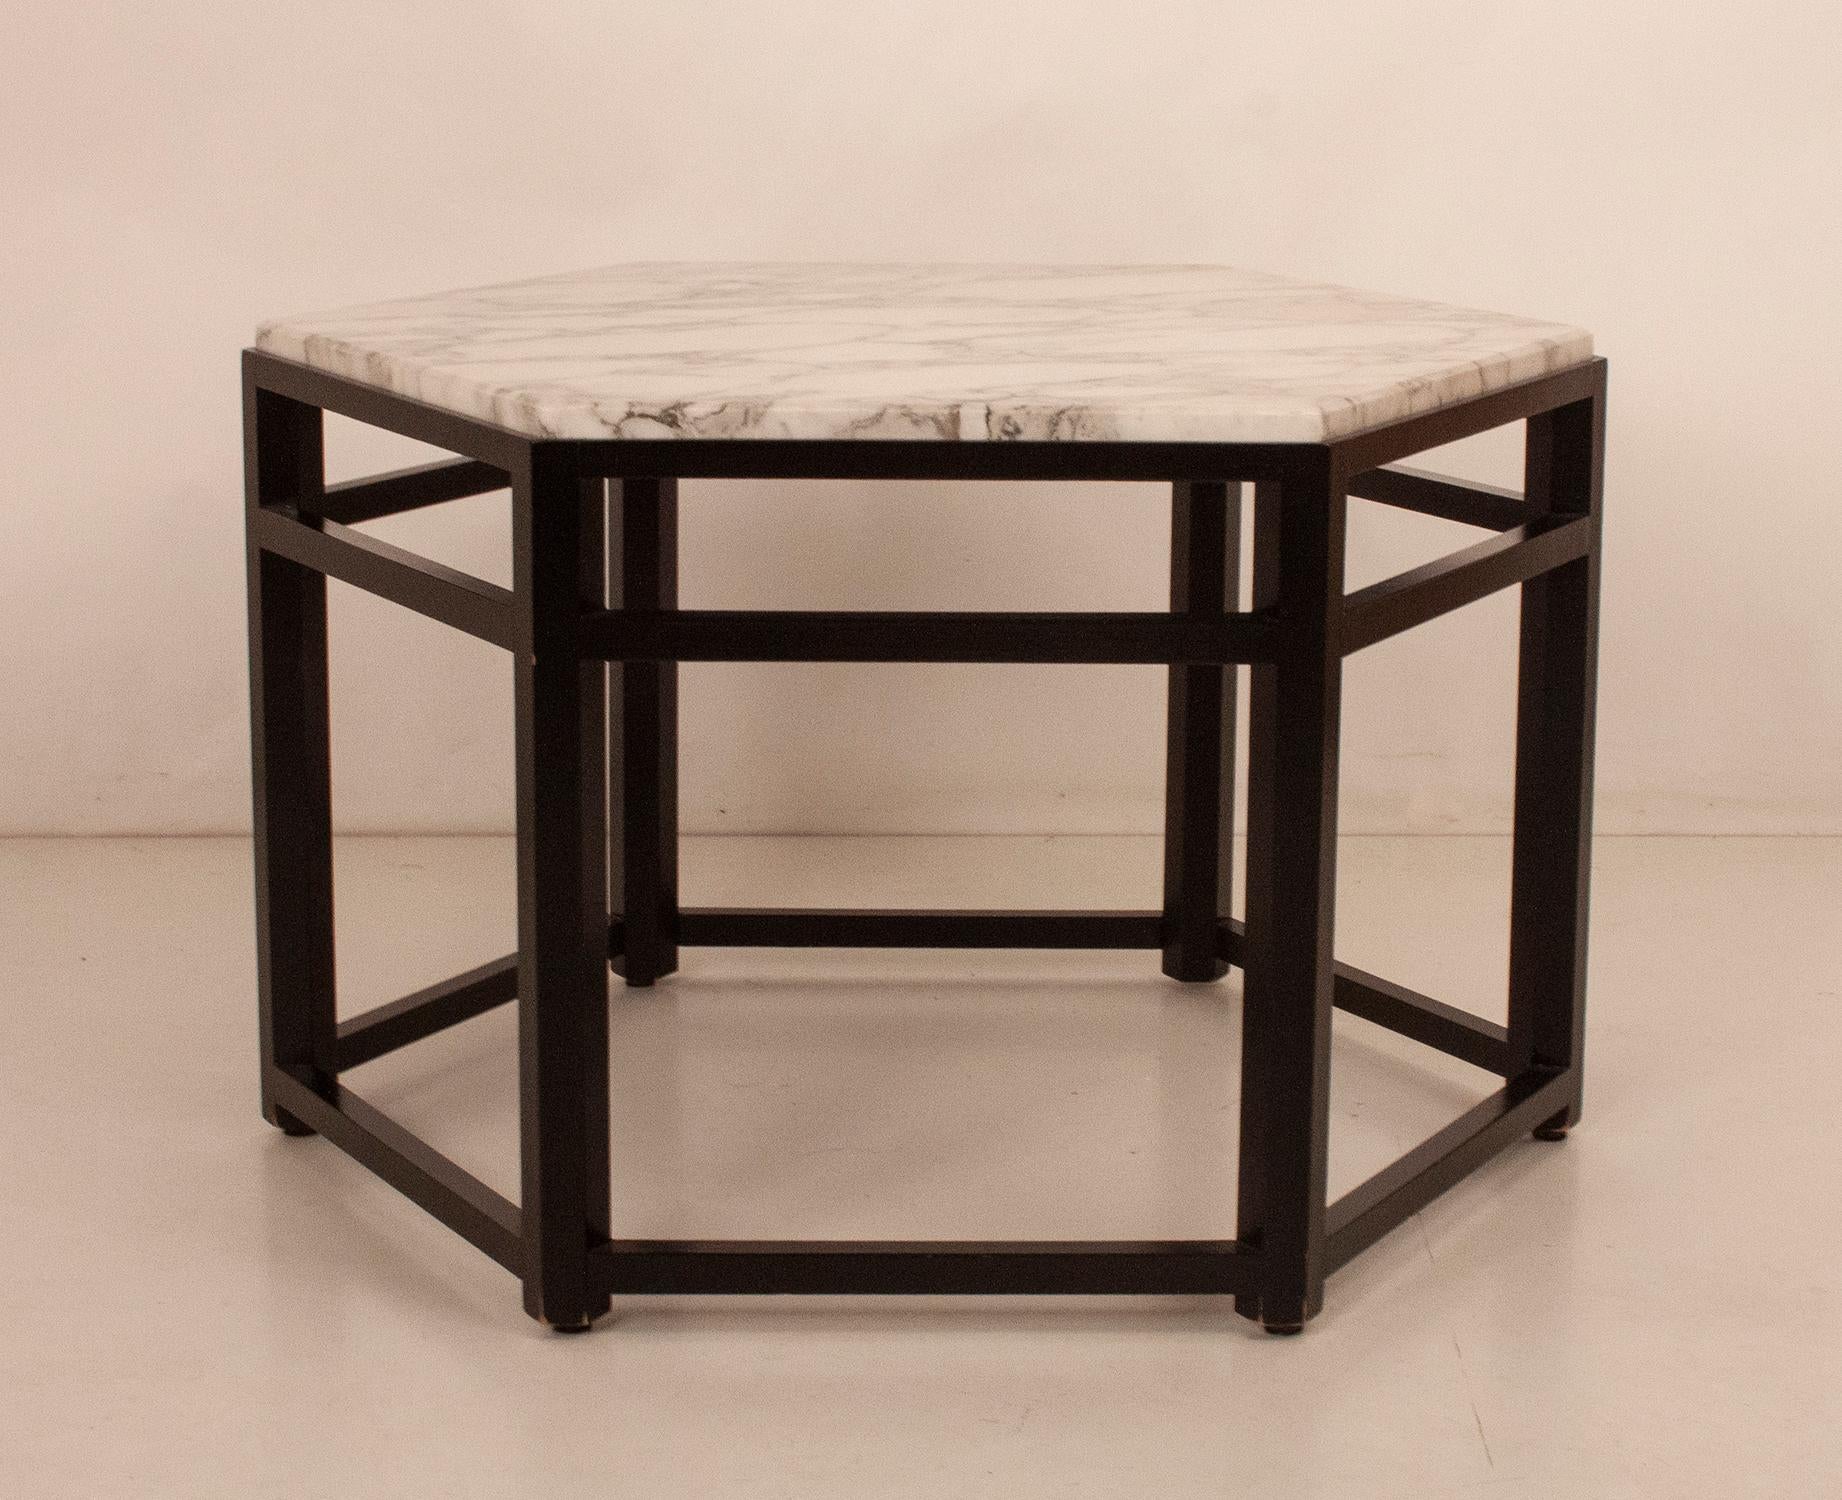 Late 20th Century Mid-century Modern Italian Side Table in White Marble and black structure, 1970s